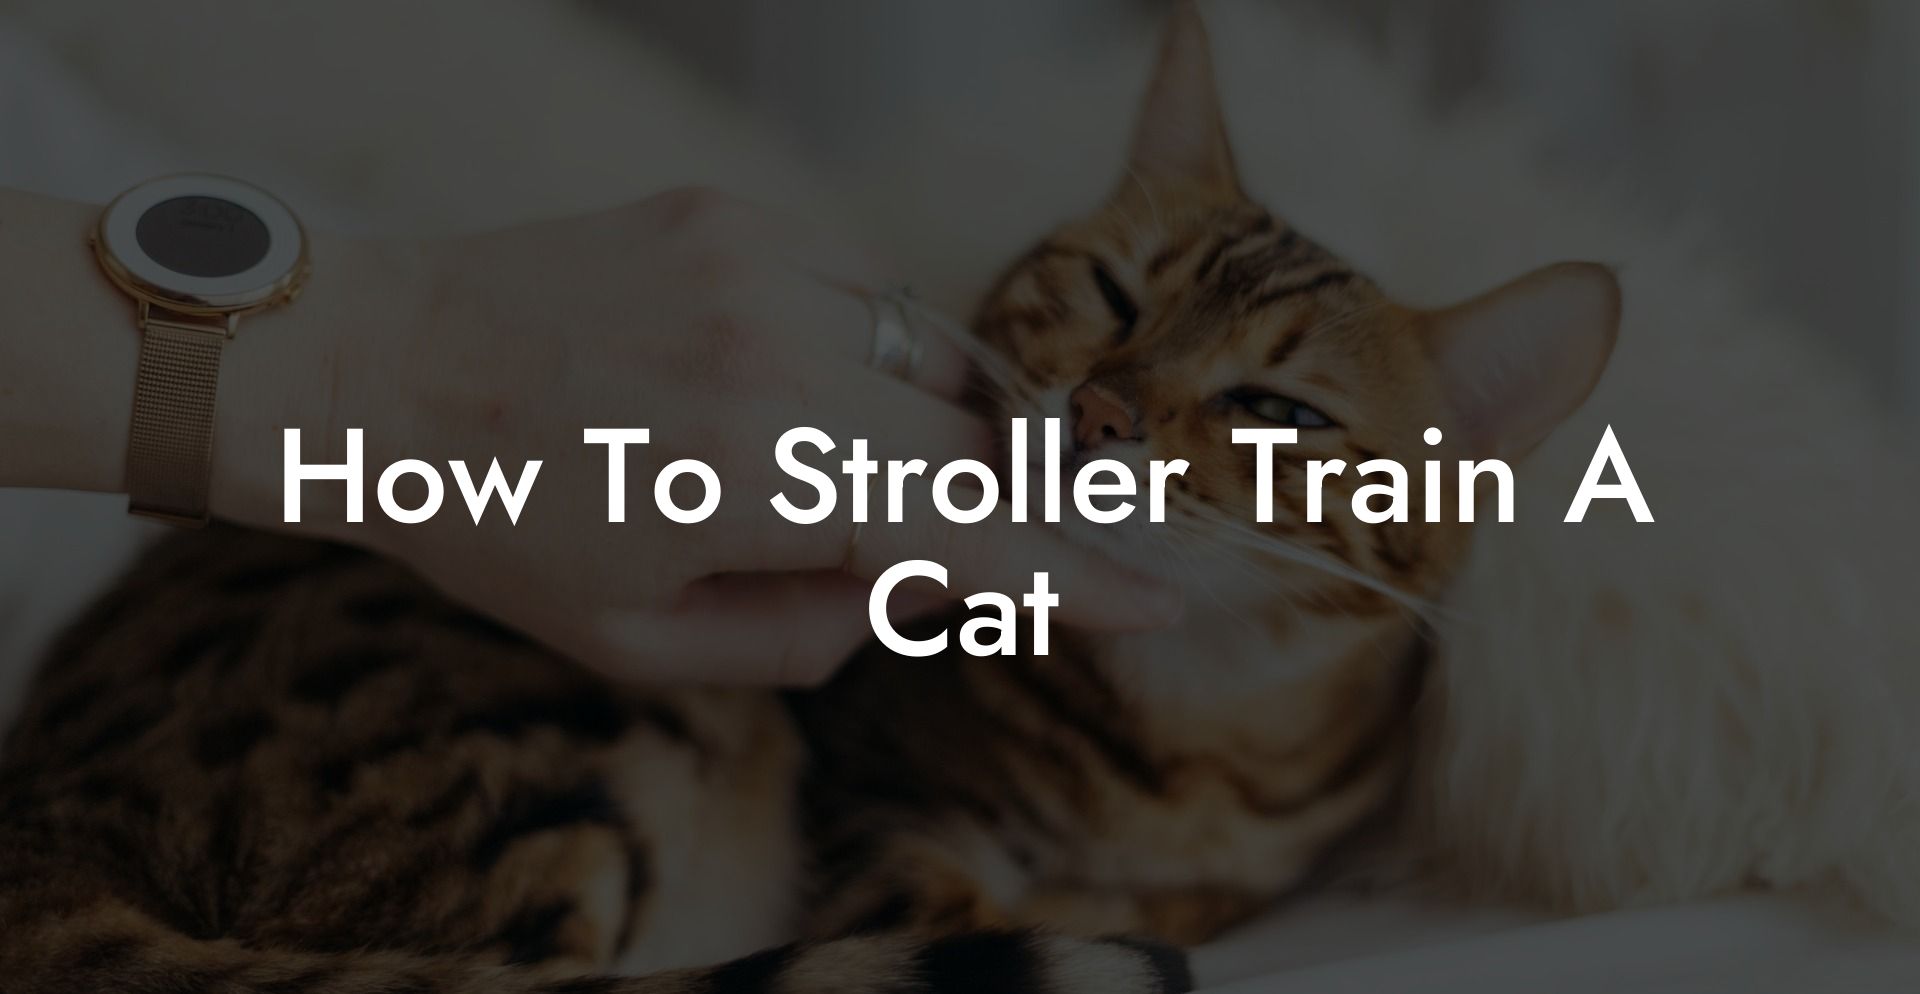 How To Stroller Train A Cat